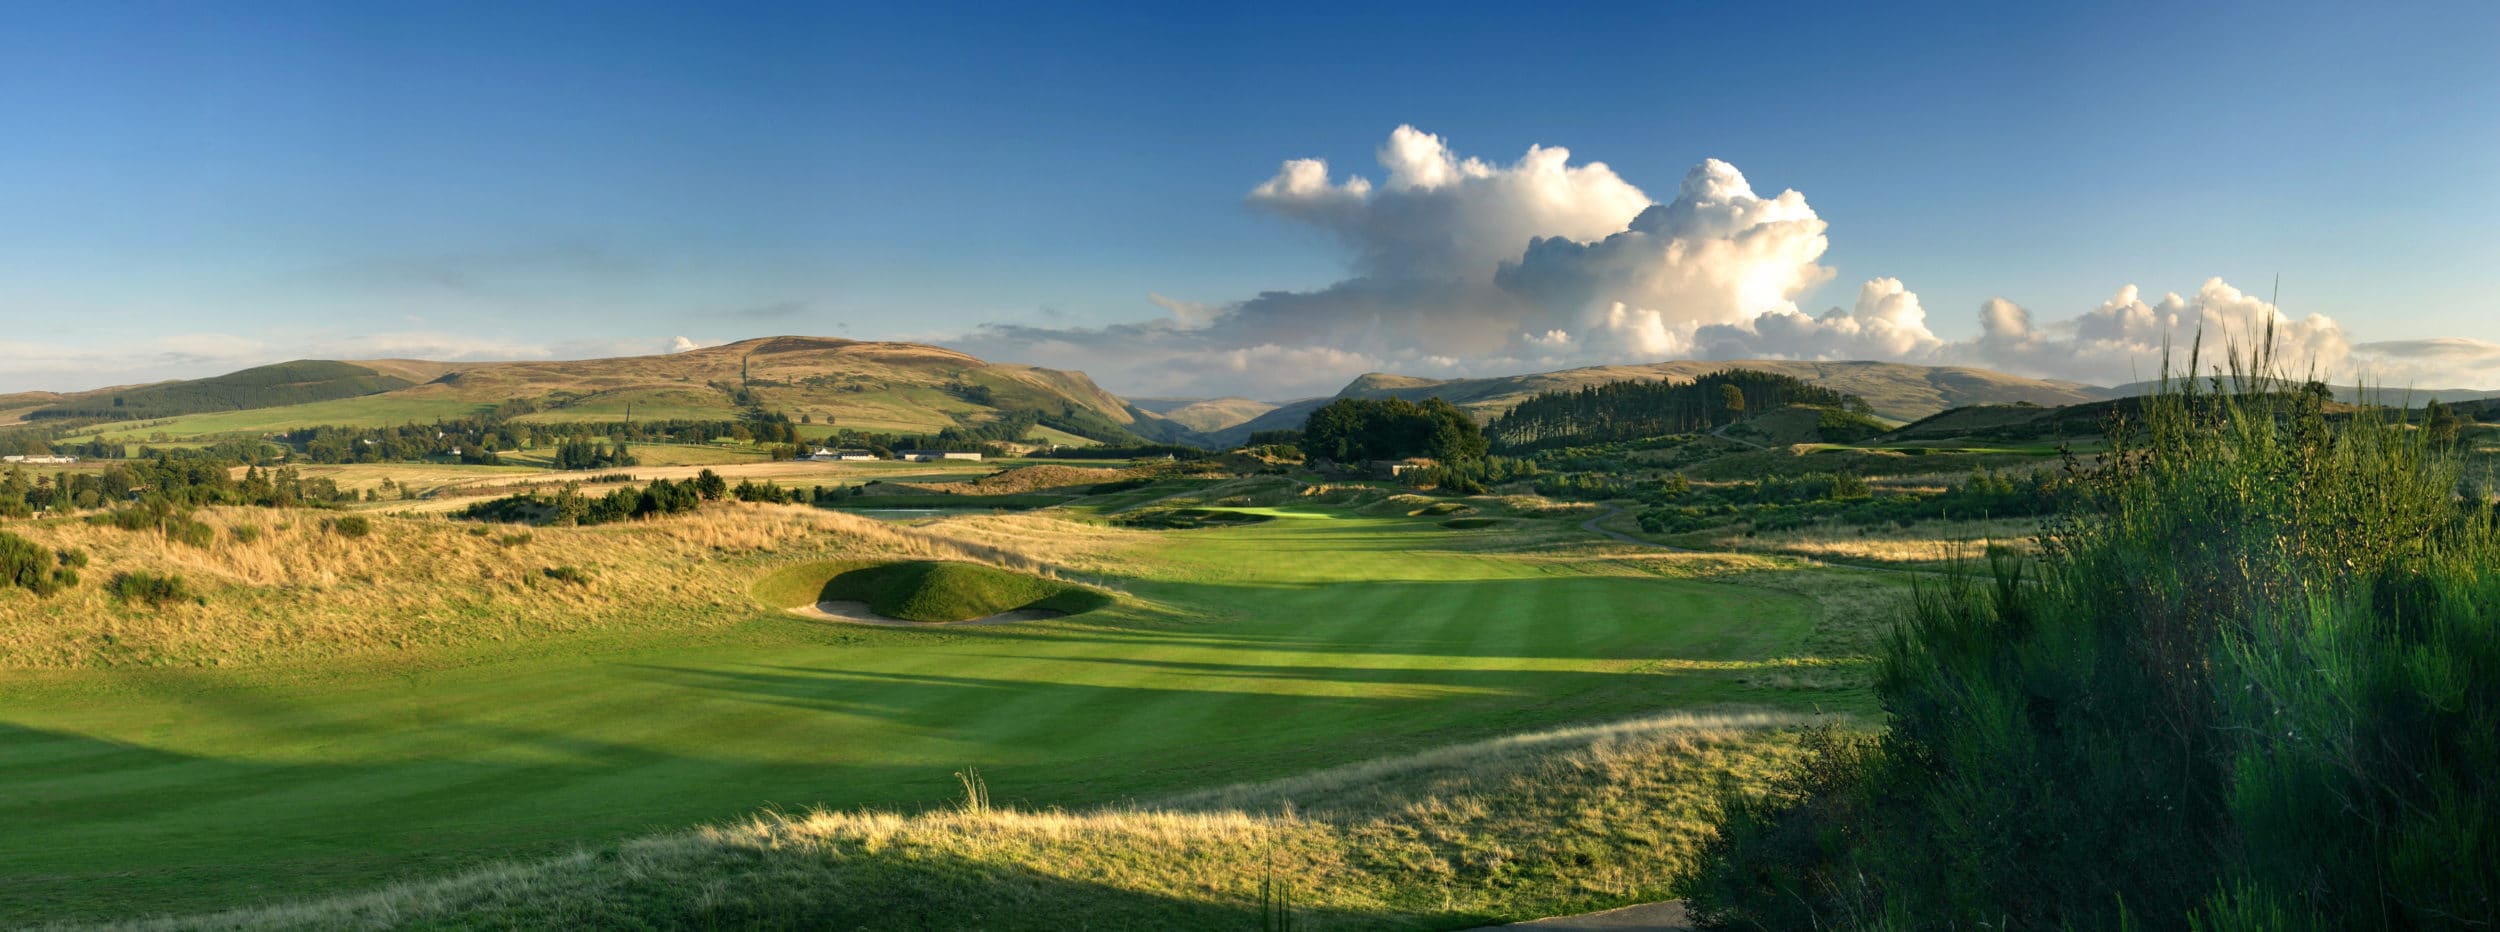 Taken from right ridge on 2nd hole of PGA Centenary Course, The Gleneagles Hotle, Scotland. Shows fairway towards green (centre distance). Glen Devon in background.